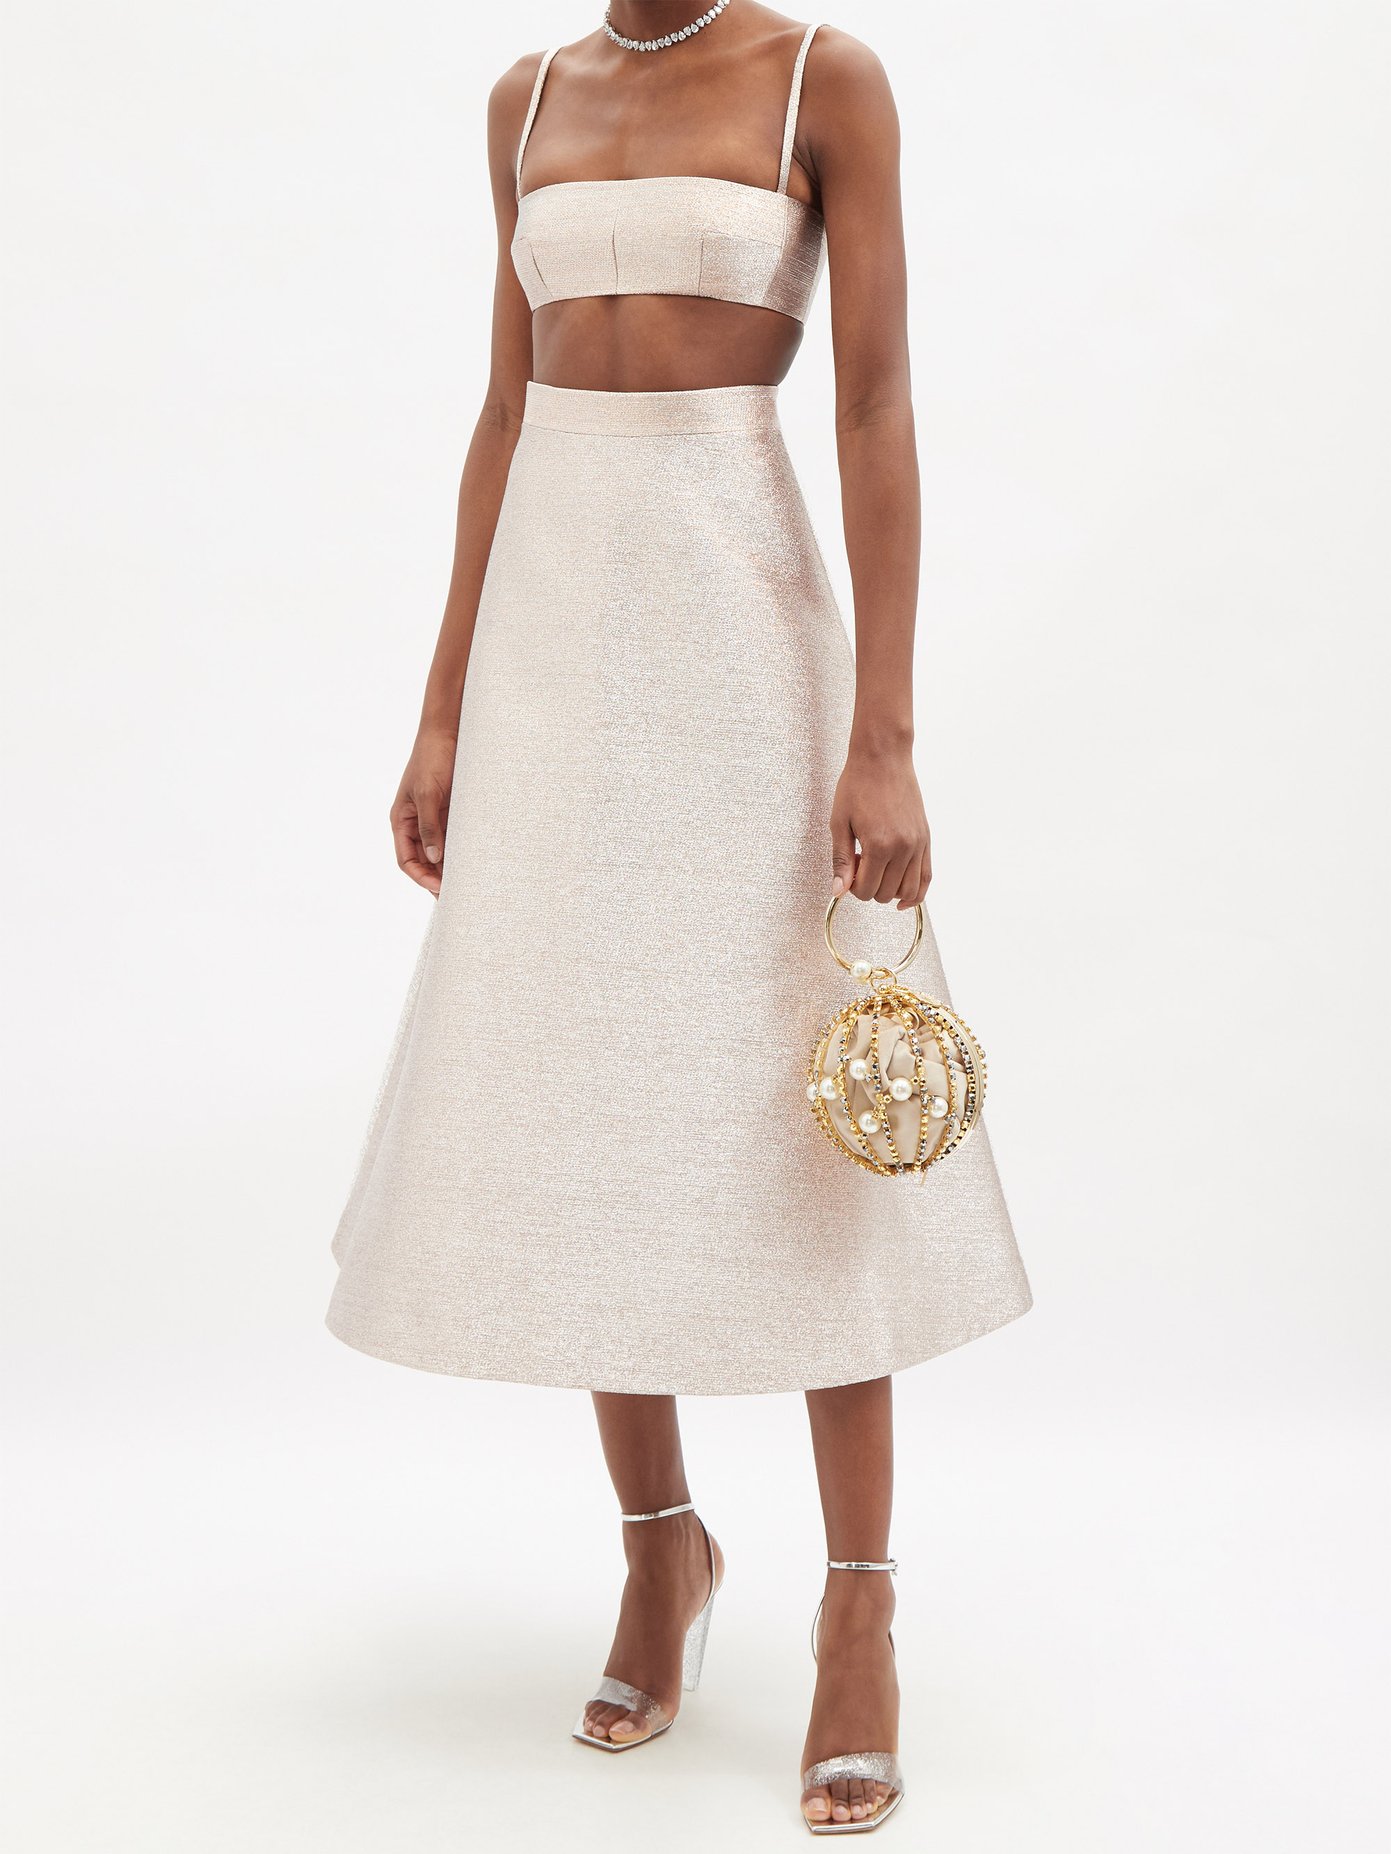 Emilia Wickstead's flattering tailoring affords this rose-gold Sage skirt a pristine impression, crafted from metallic-weave cloth to create a structured full shape.